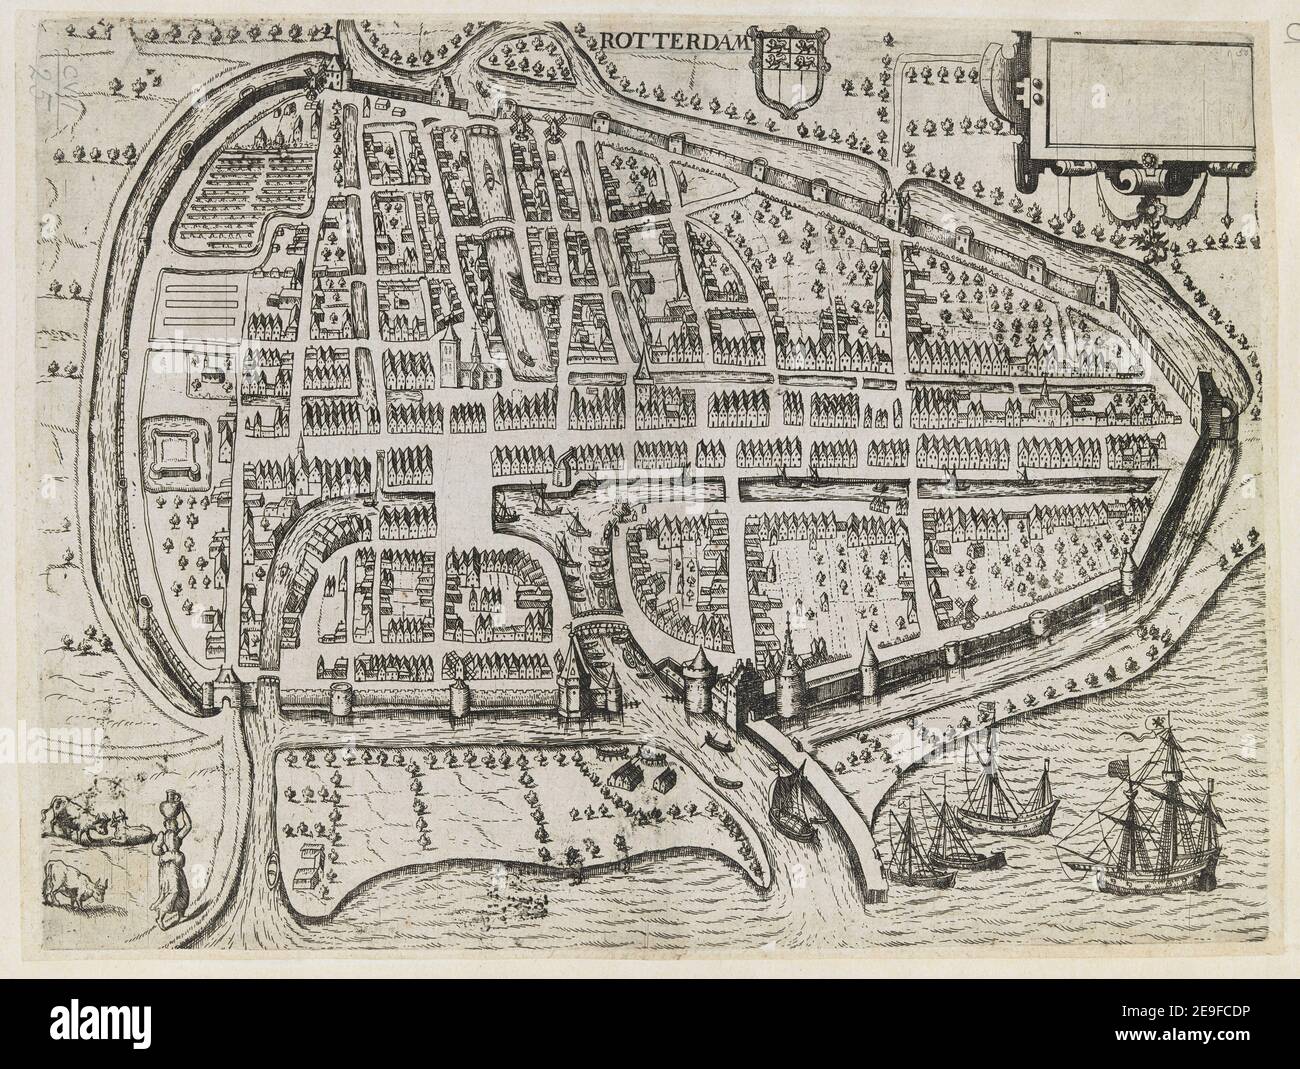 ROTTERDAM. Map information:  Title: ROTTERDAM. 107.25. Place of publication: [Amsterdam?] Publisher: [publisher not identified] Date of publication: [between 1600 and 1650]  Item type: 1 map Medium: copperplate engraving Dimensions: 24.3 x 32.5 cm  Former owner: George III, King of Great Britain, 1738-1820 Stock Photo